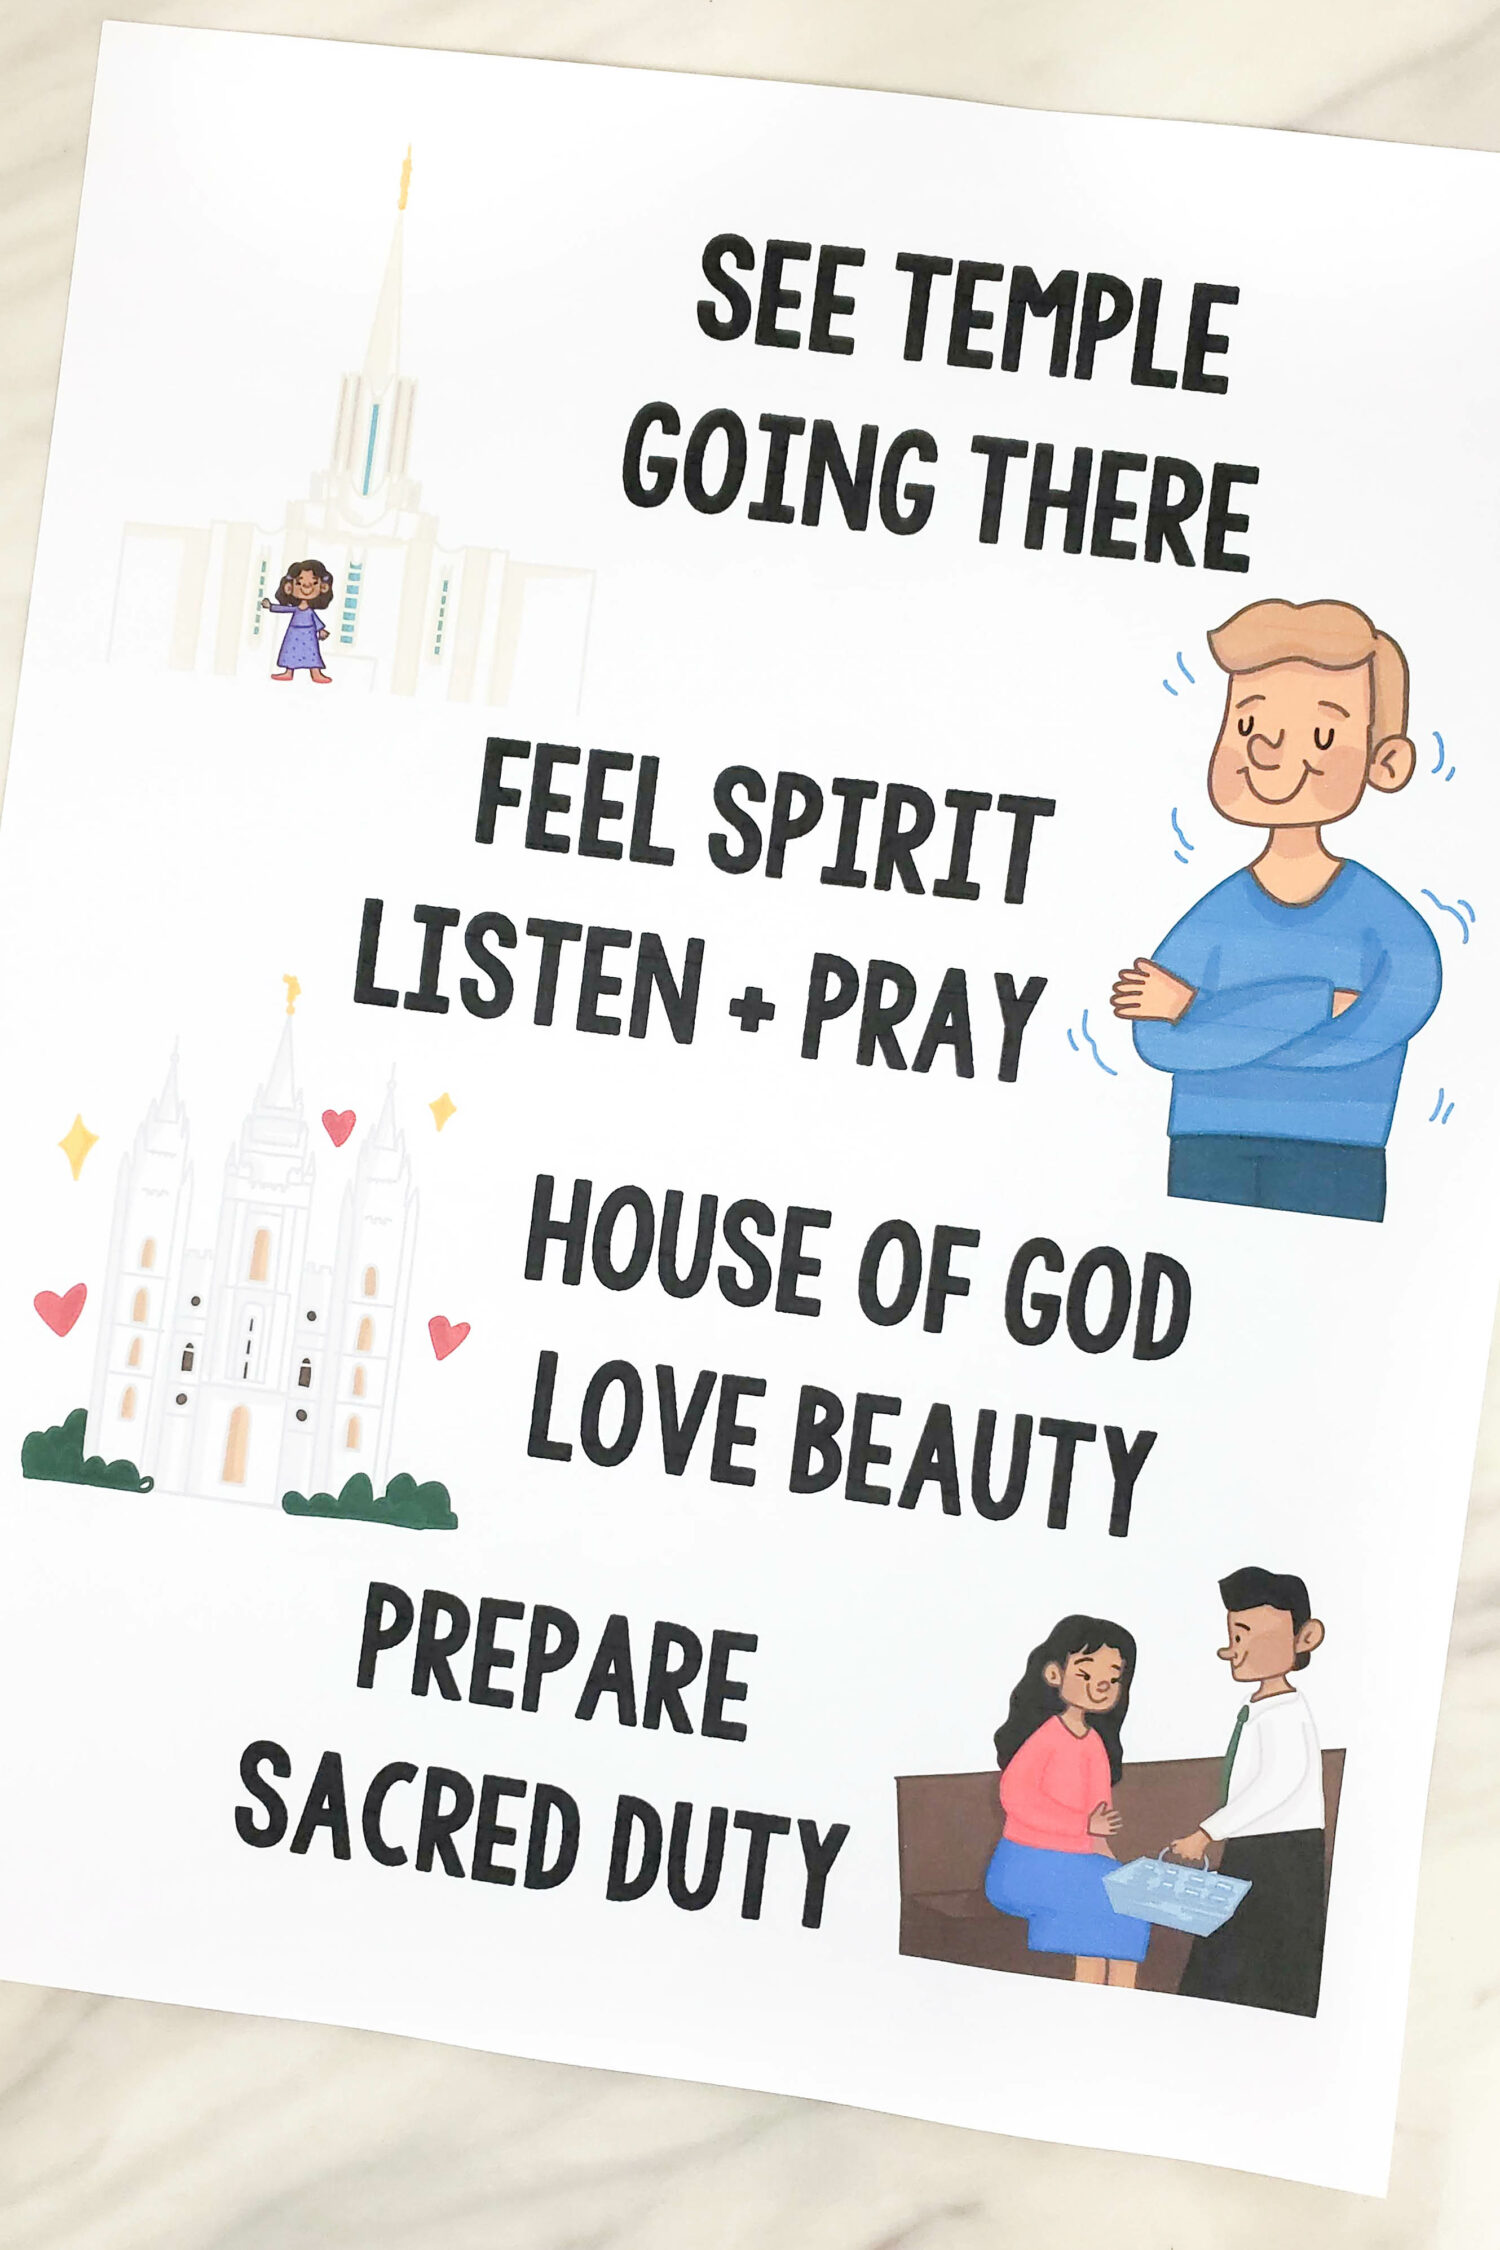 I Love to See the Temple Flip Chart